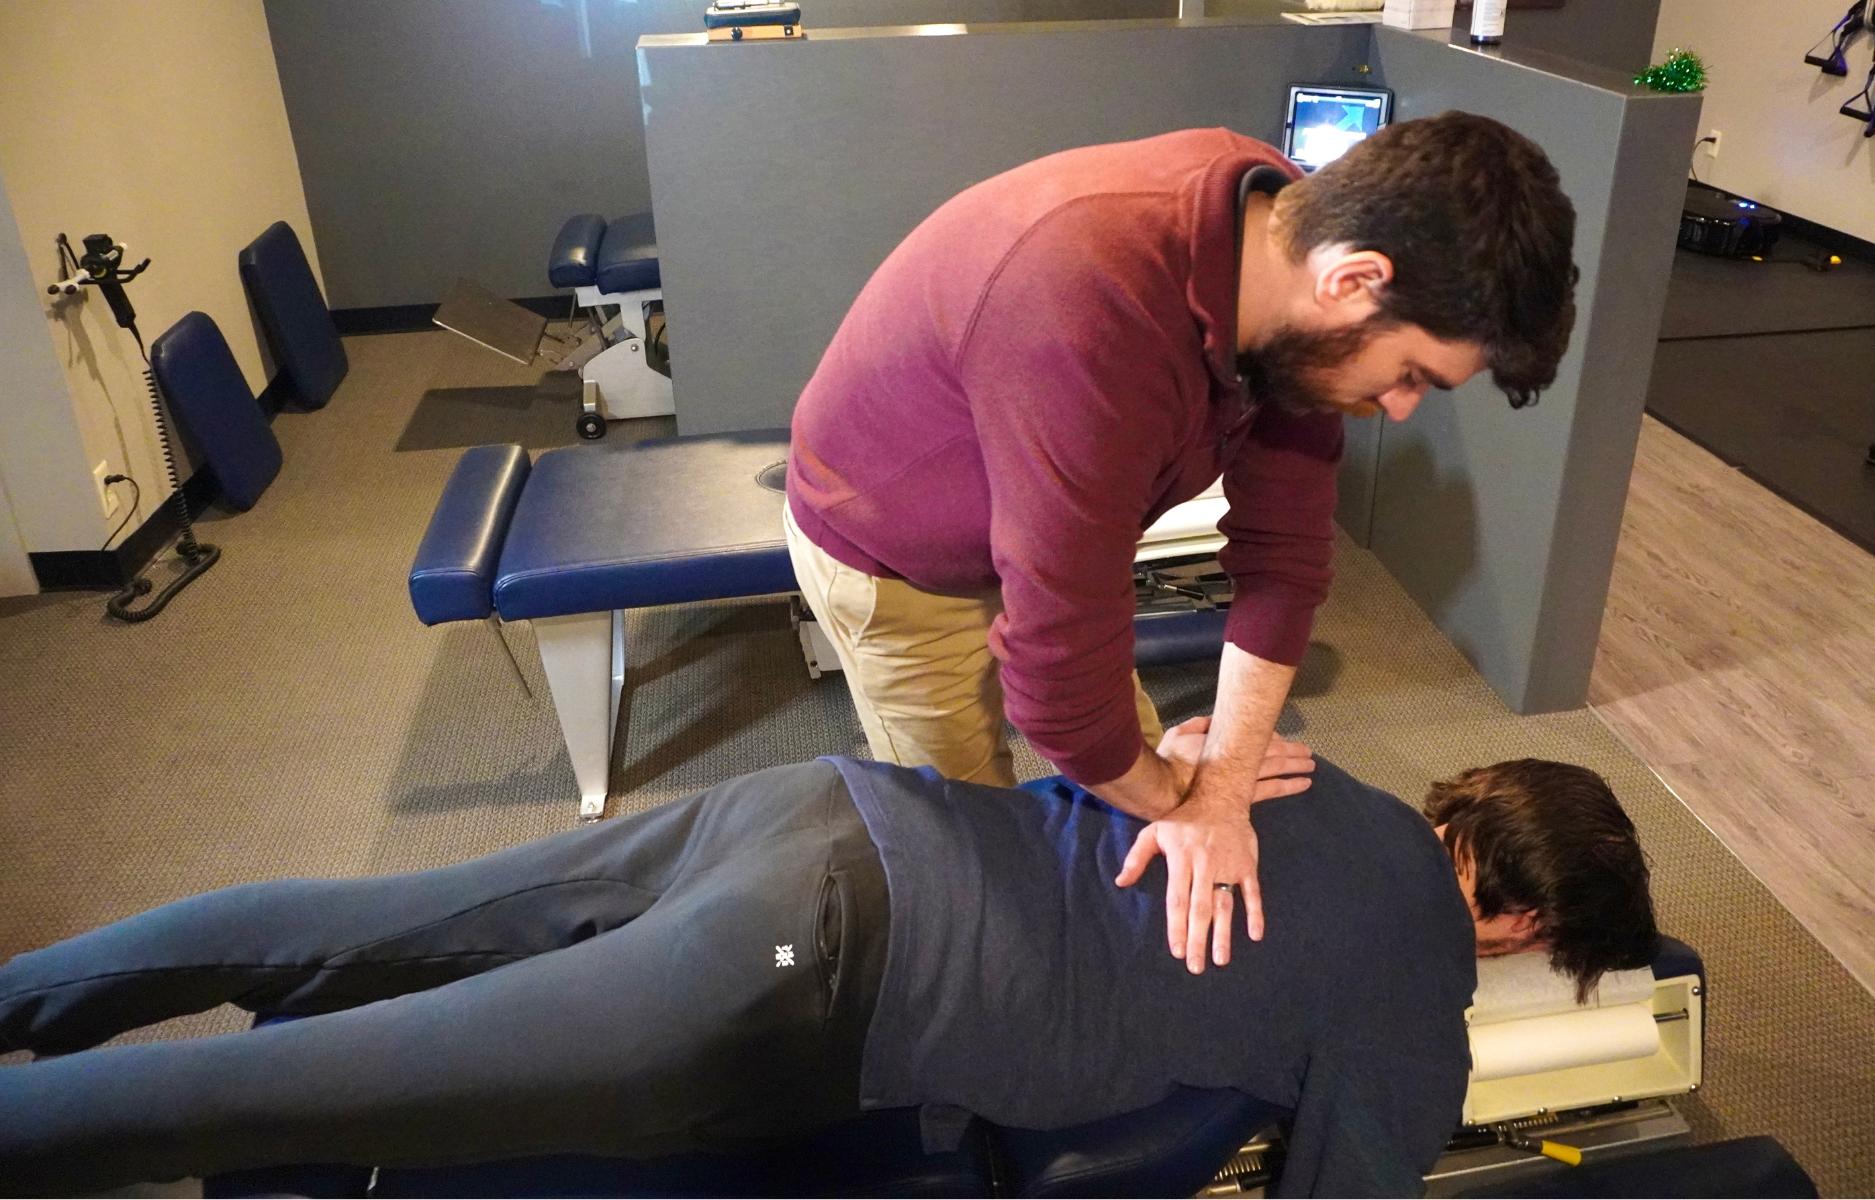 Dr. Herbert providing chiropractic care as part of a scoliosis treatment plan